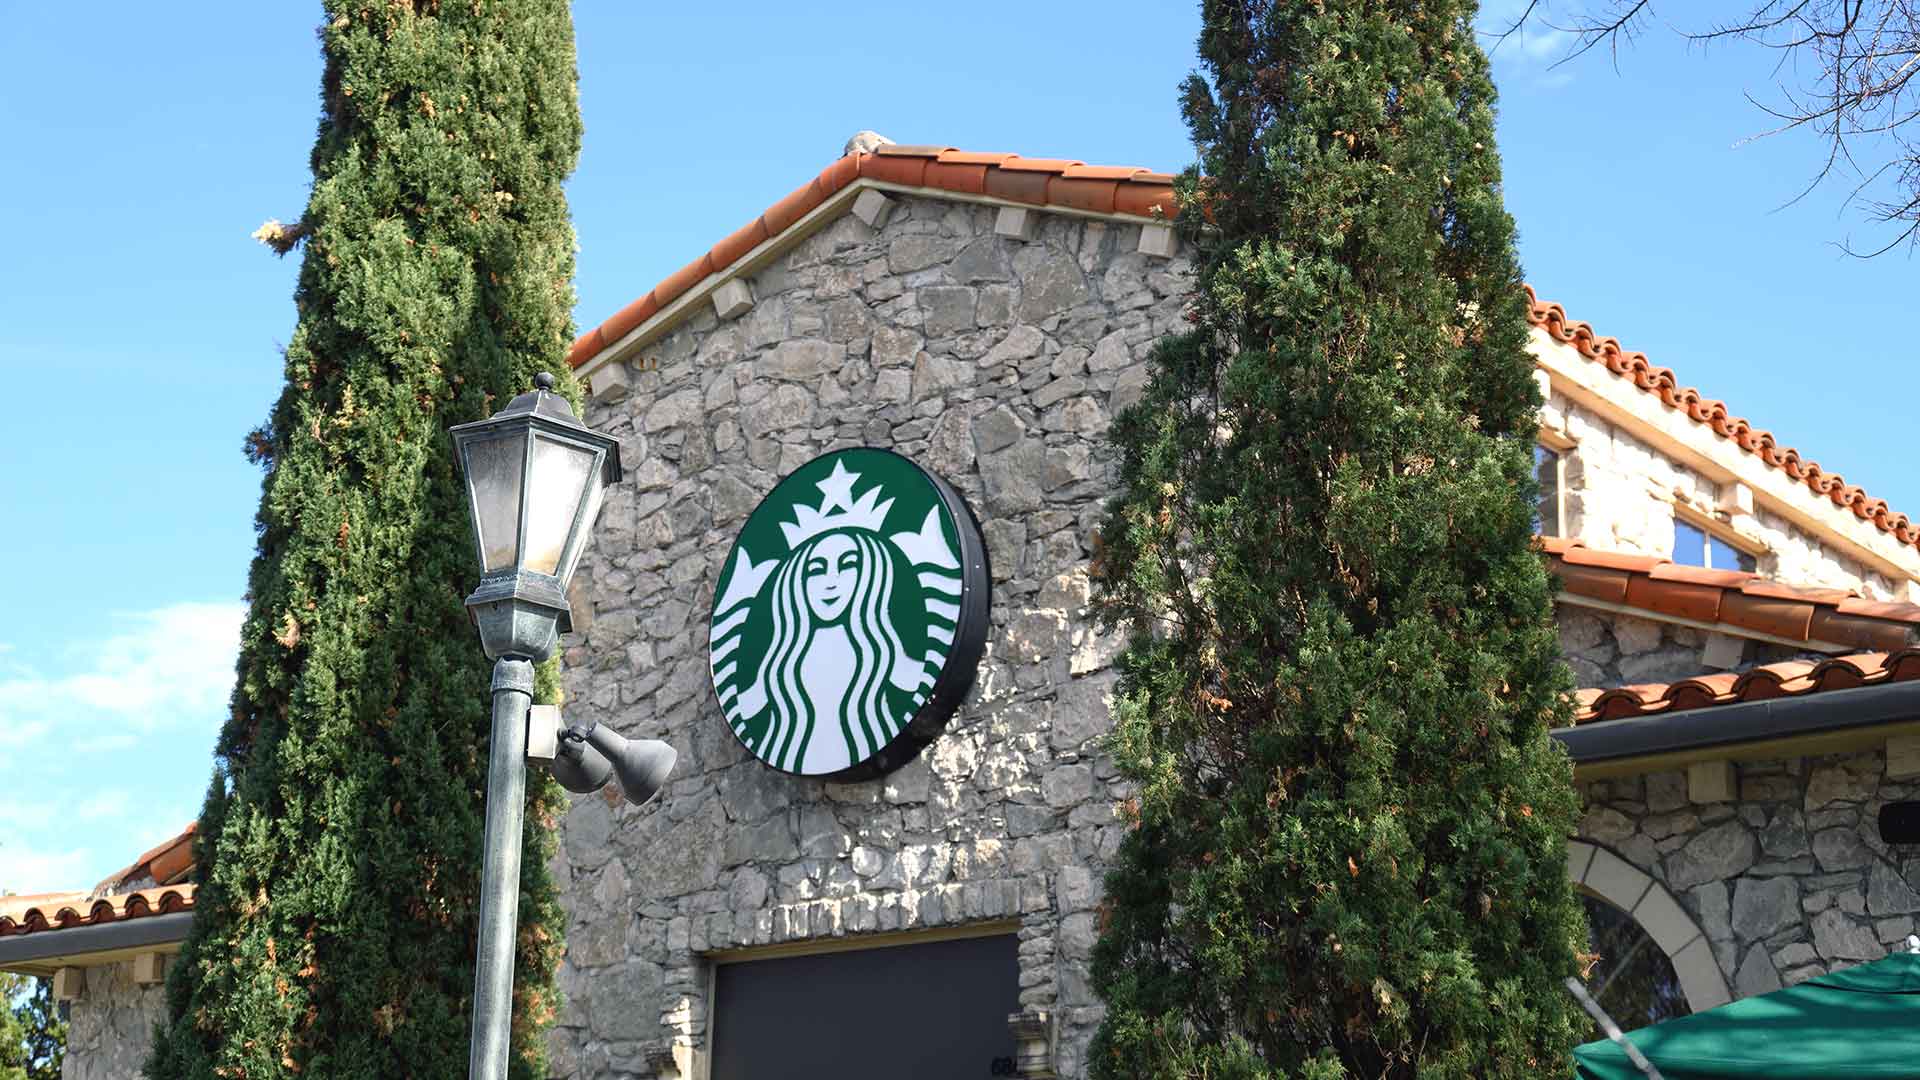 A close up look at a coffee house logo above a door on a stone building at Adriatica.